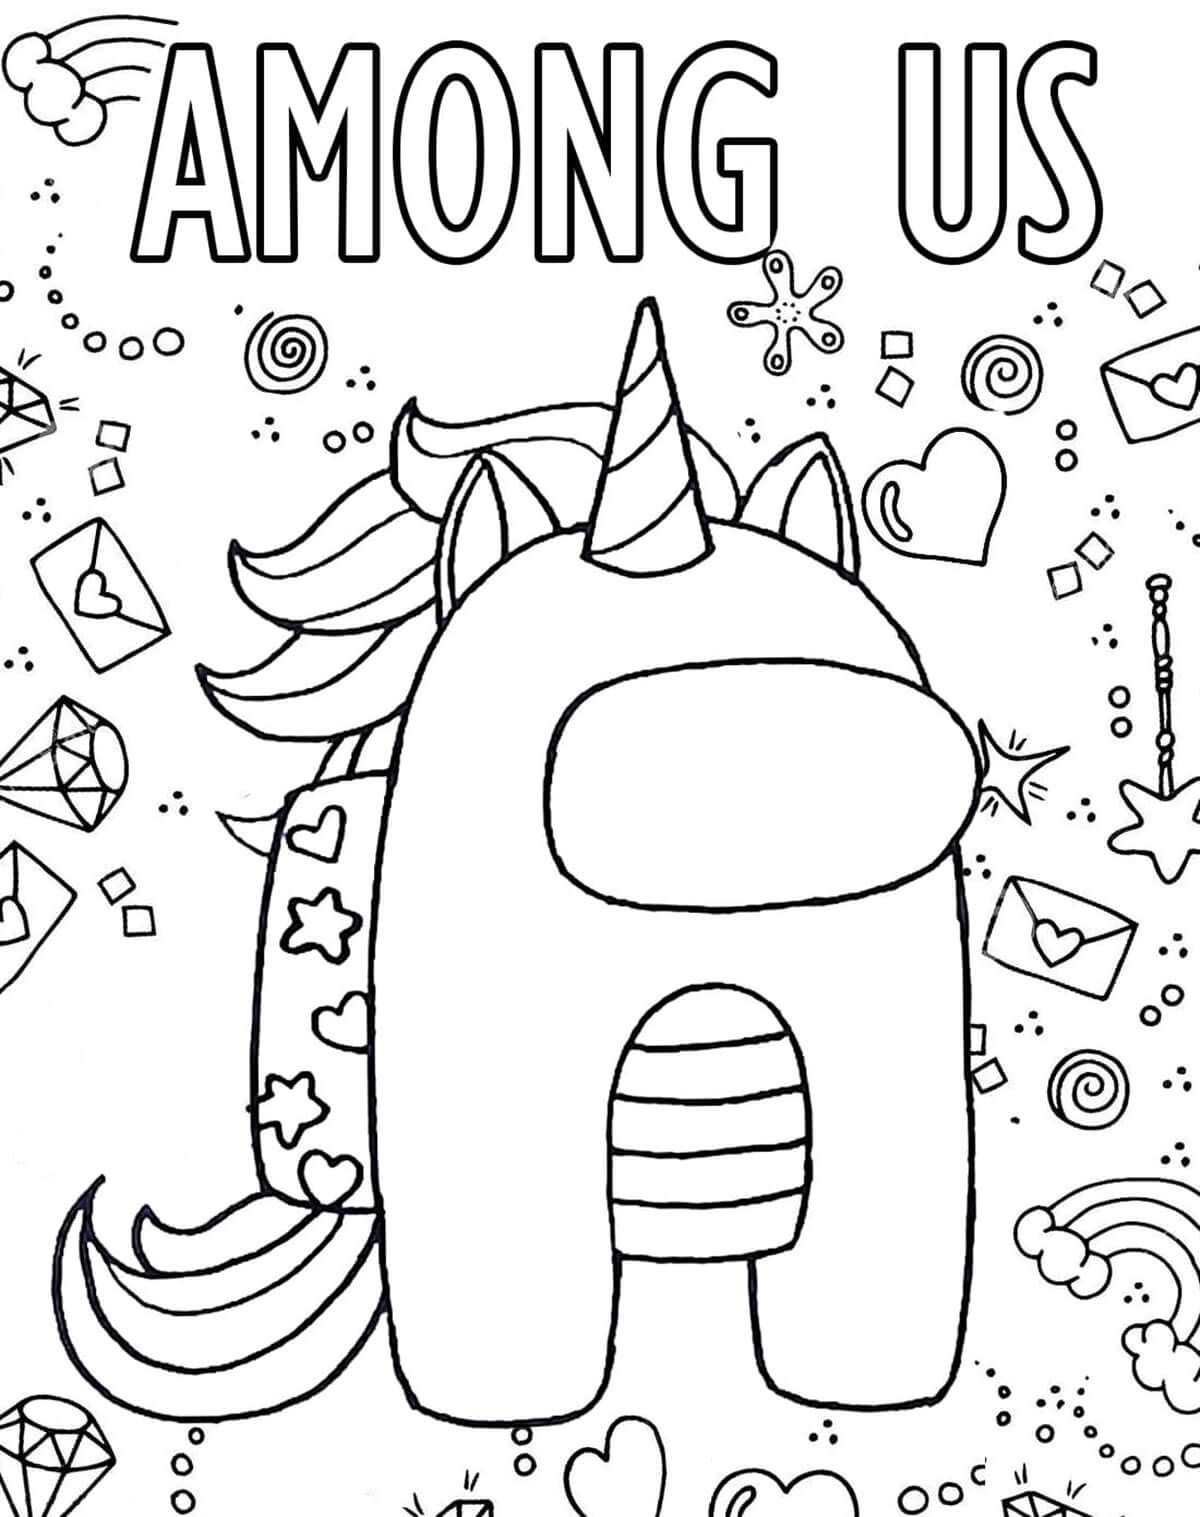 Download Among Us 9 Coloring Page - Free Printable Coloring Pages ...